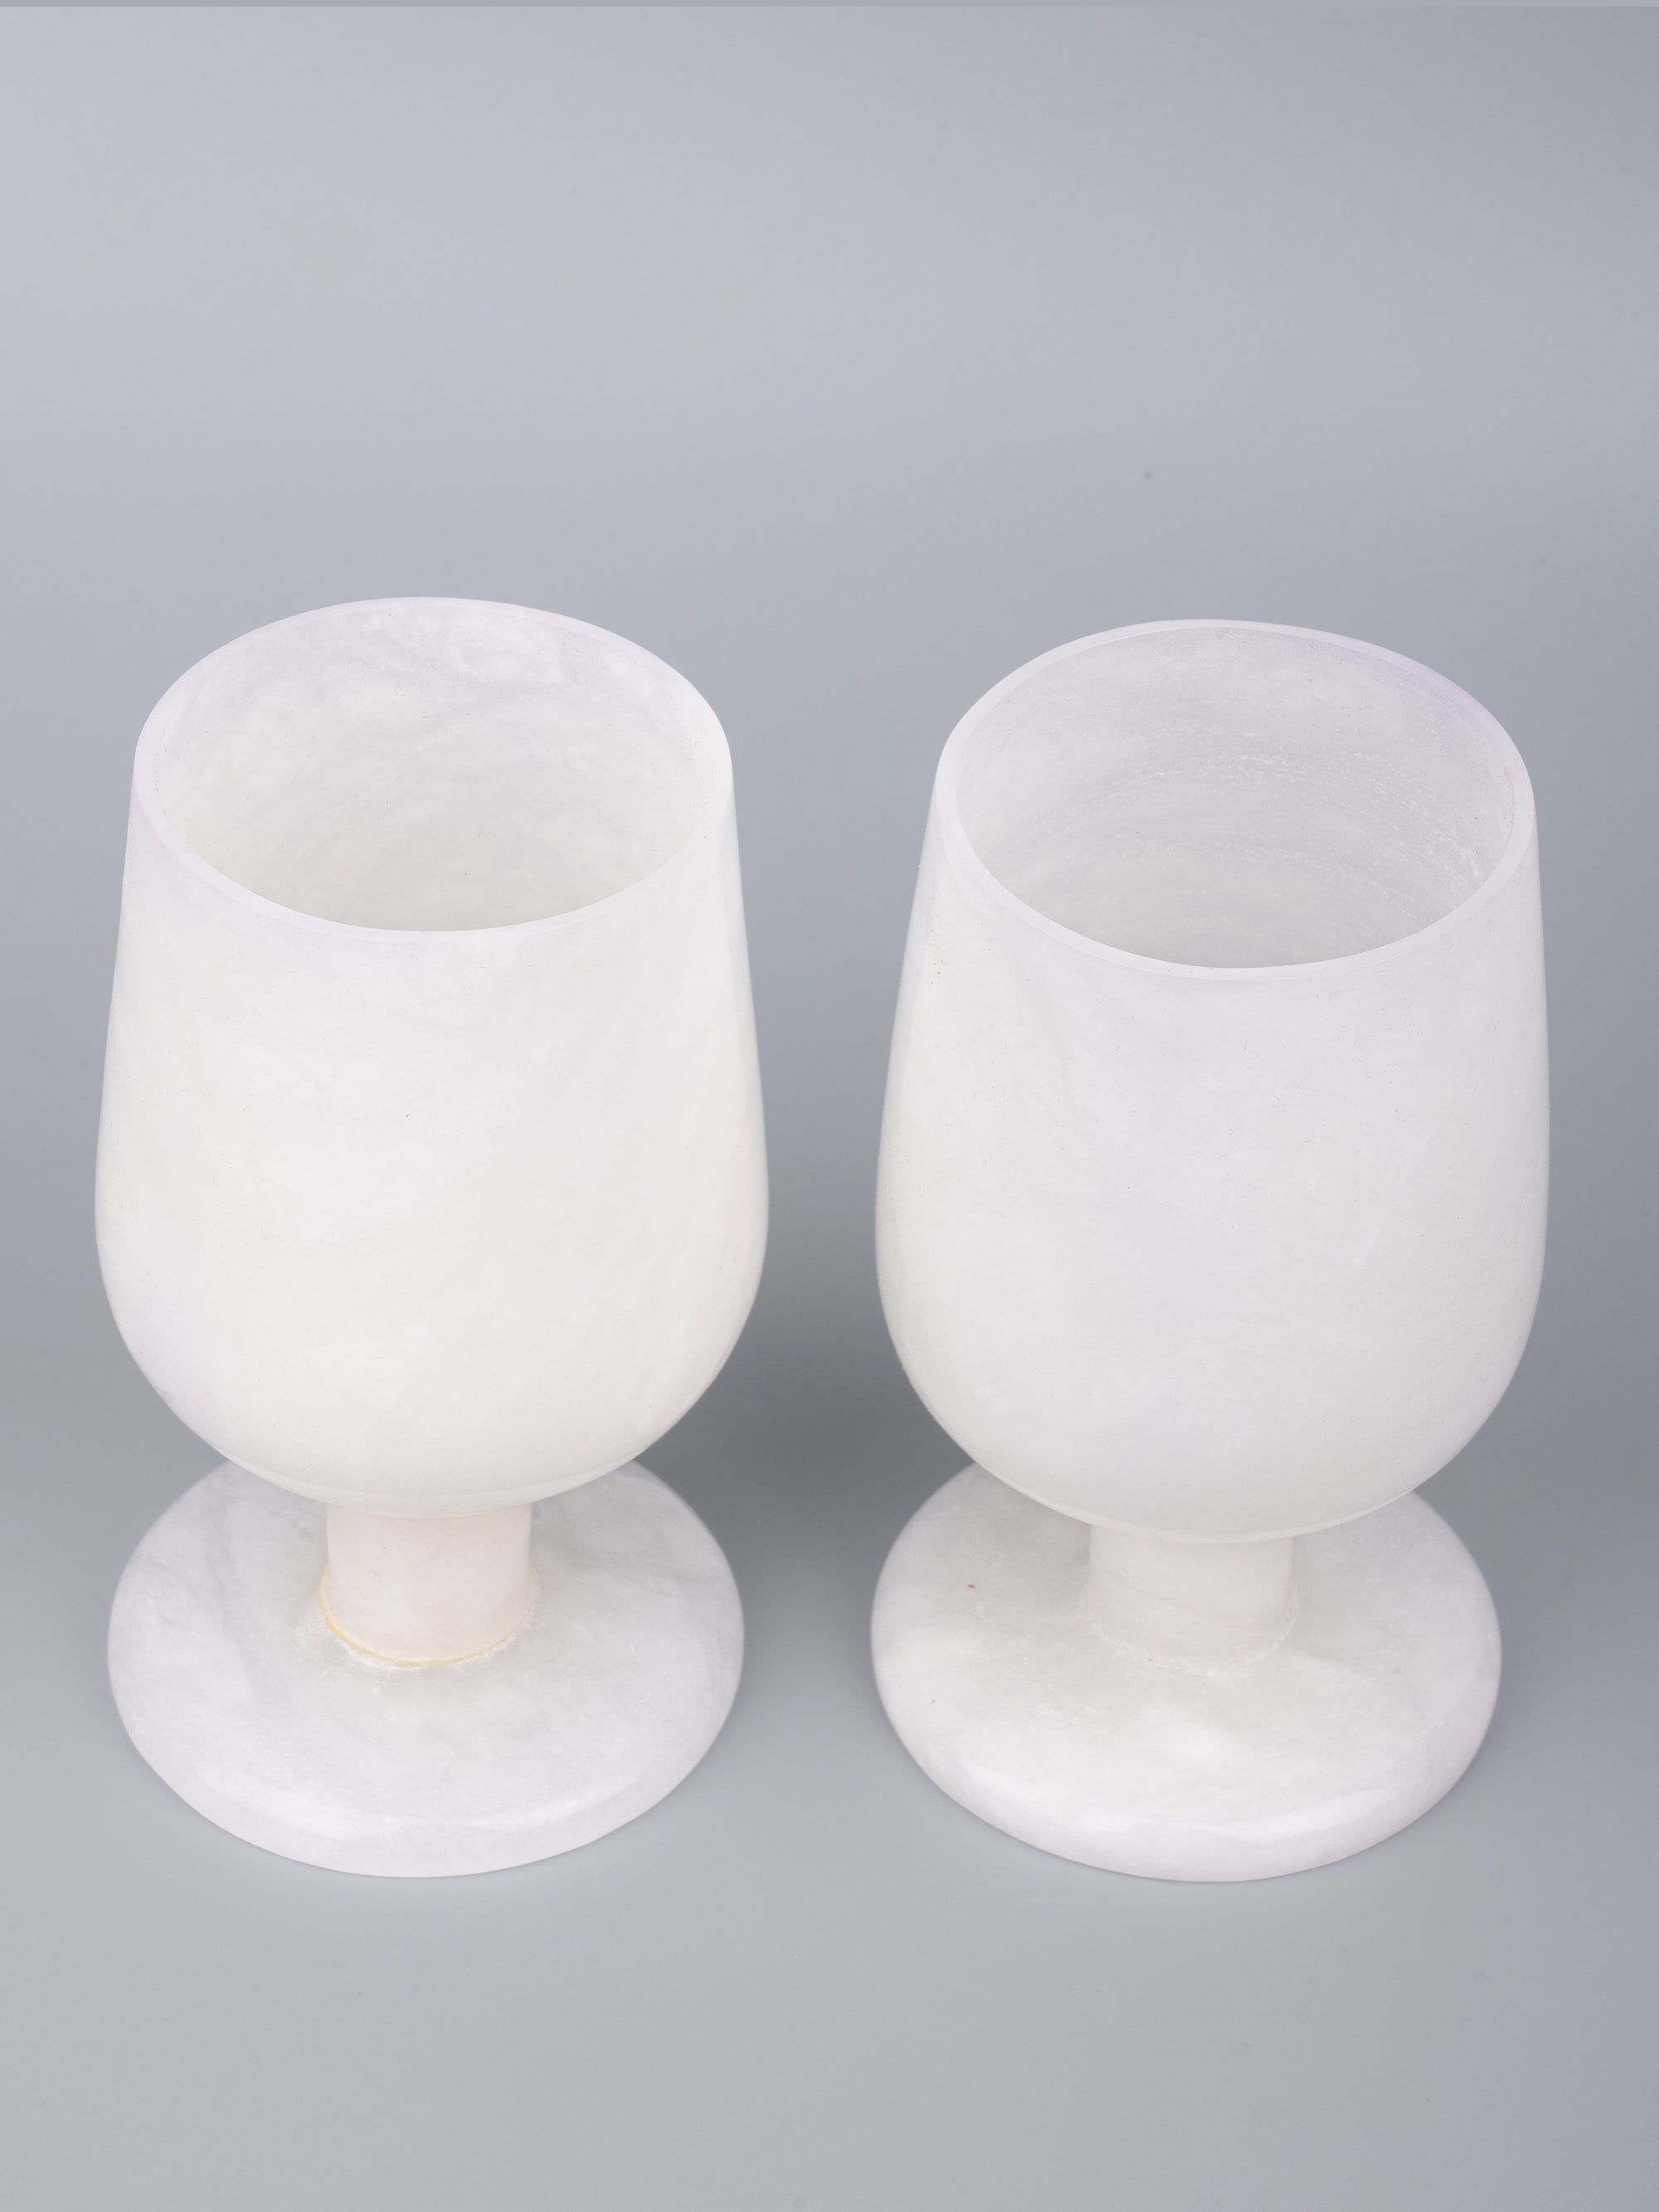 Royal white marble wine glass - set of 2 pcs in a gift box - The Heritage Artifacts